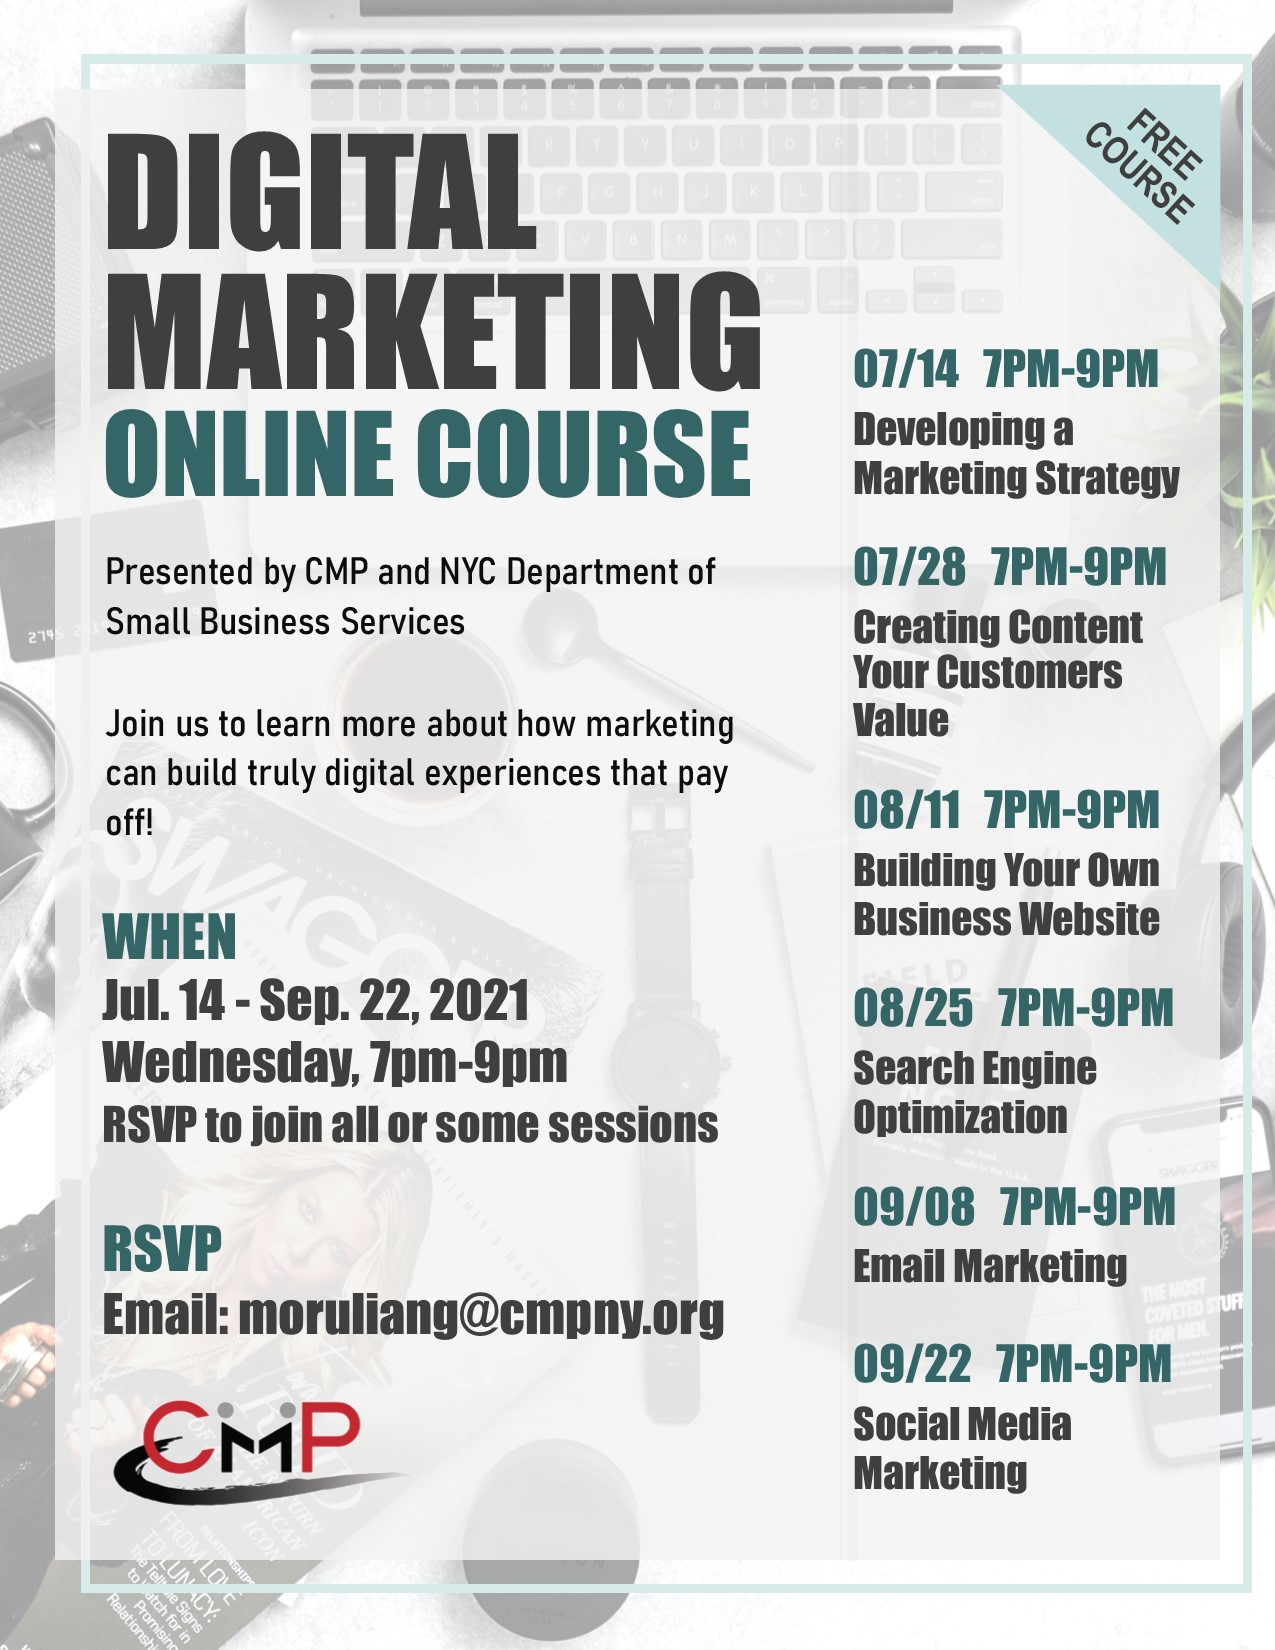 26 Free Online Marketing Courses to Learn Digital Marketing